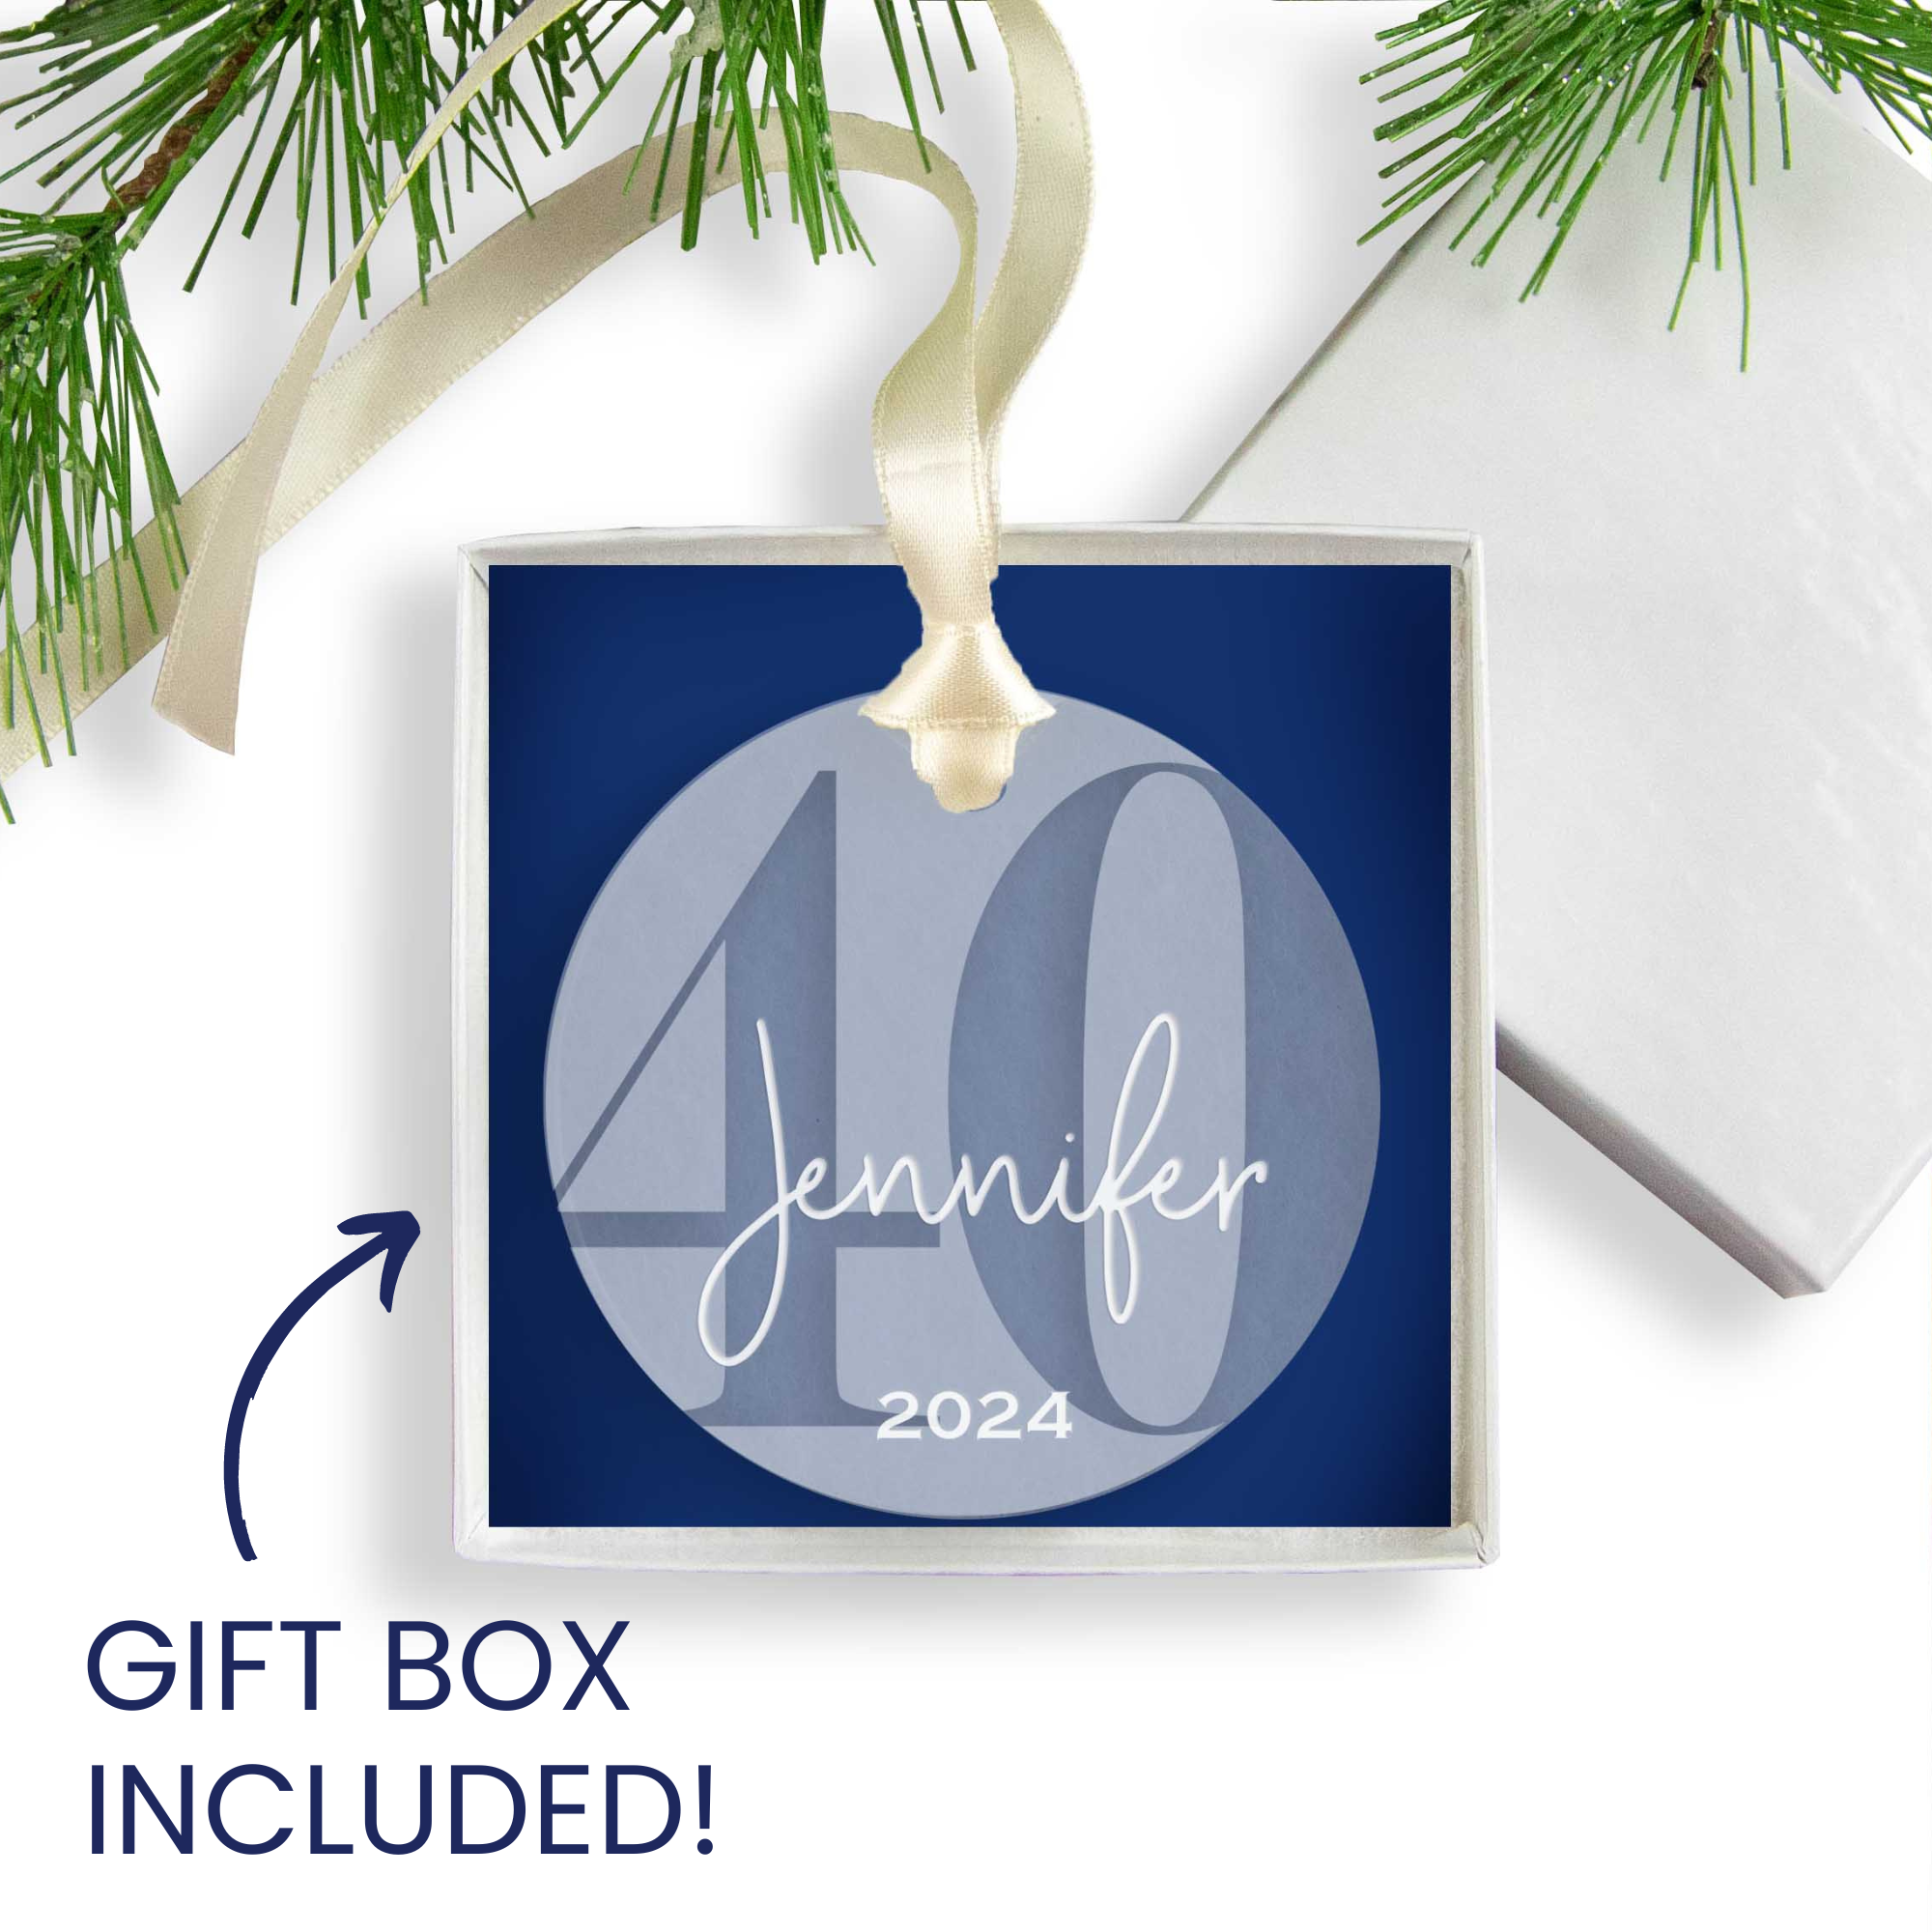 Personalized 40th Birthday Acrylic Christmas Ornament, Gift Box Included